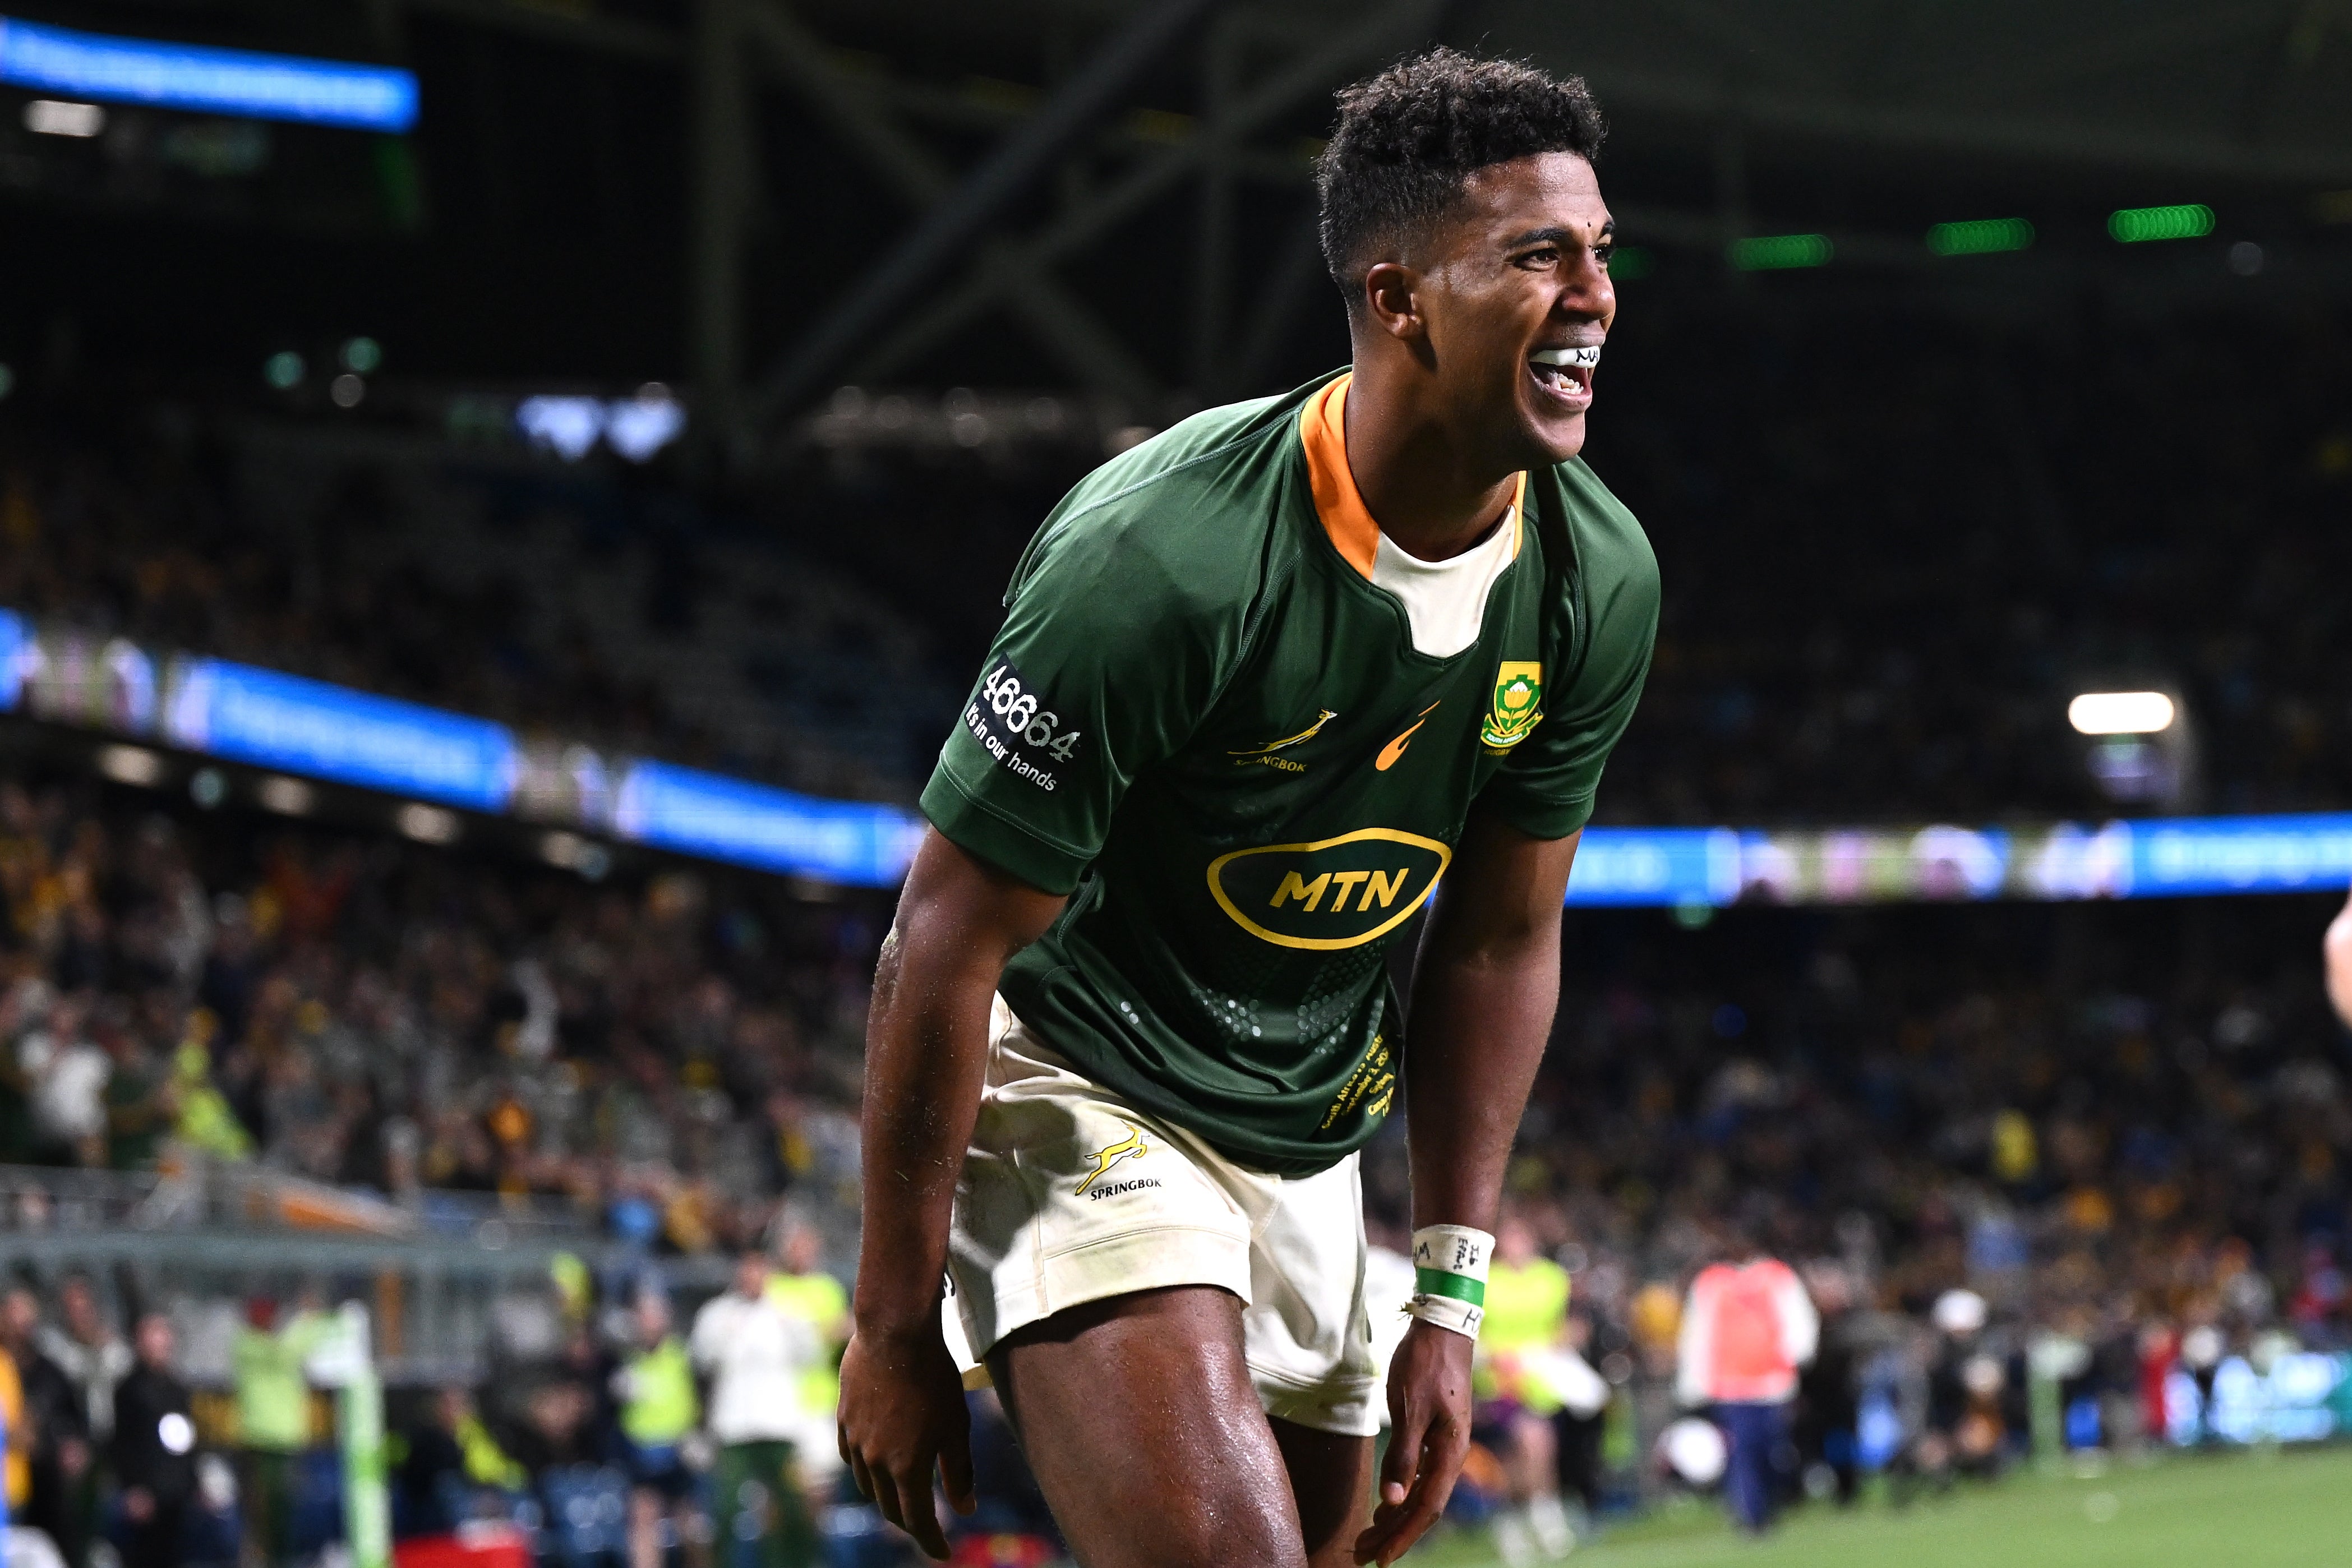 Canan Moodie celebrates scoring a debut try for the Springboks